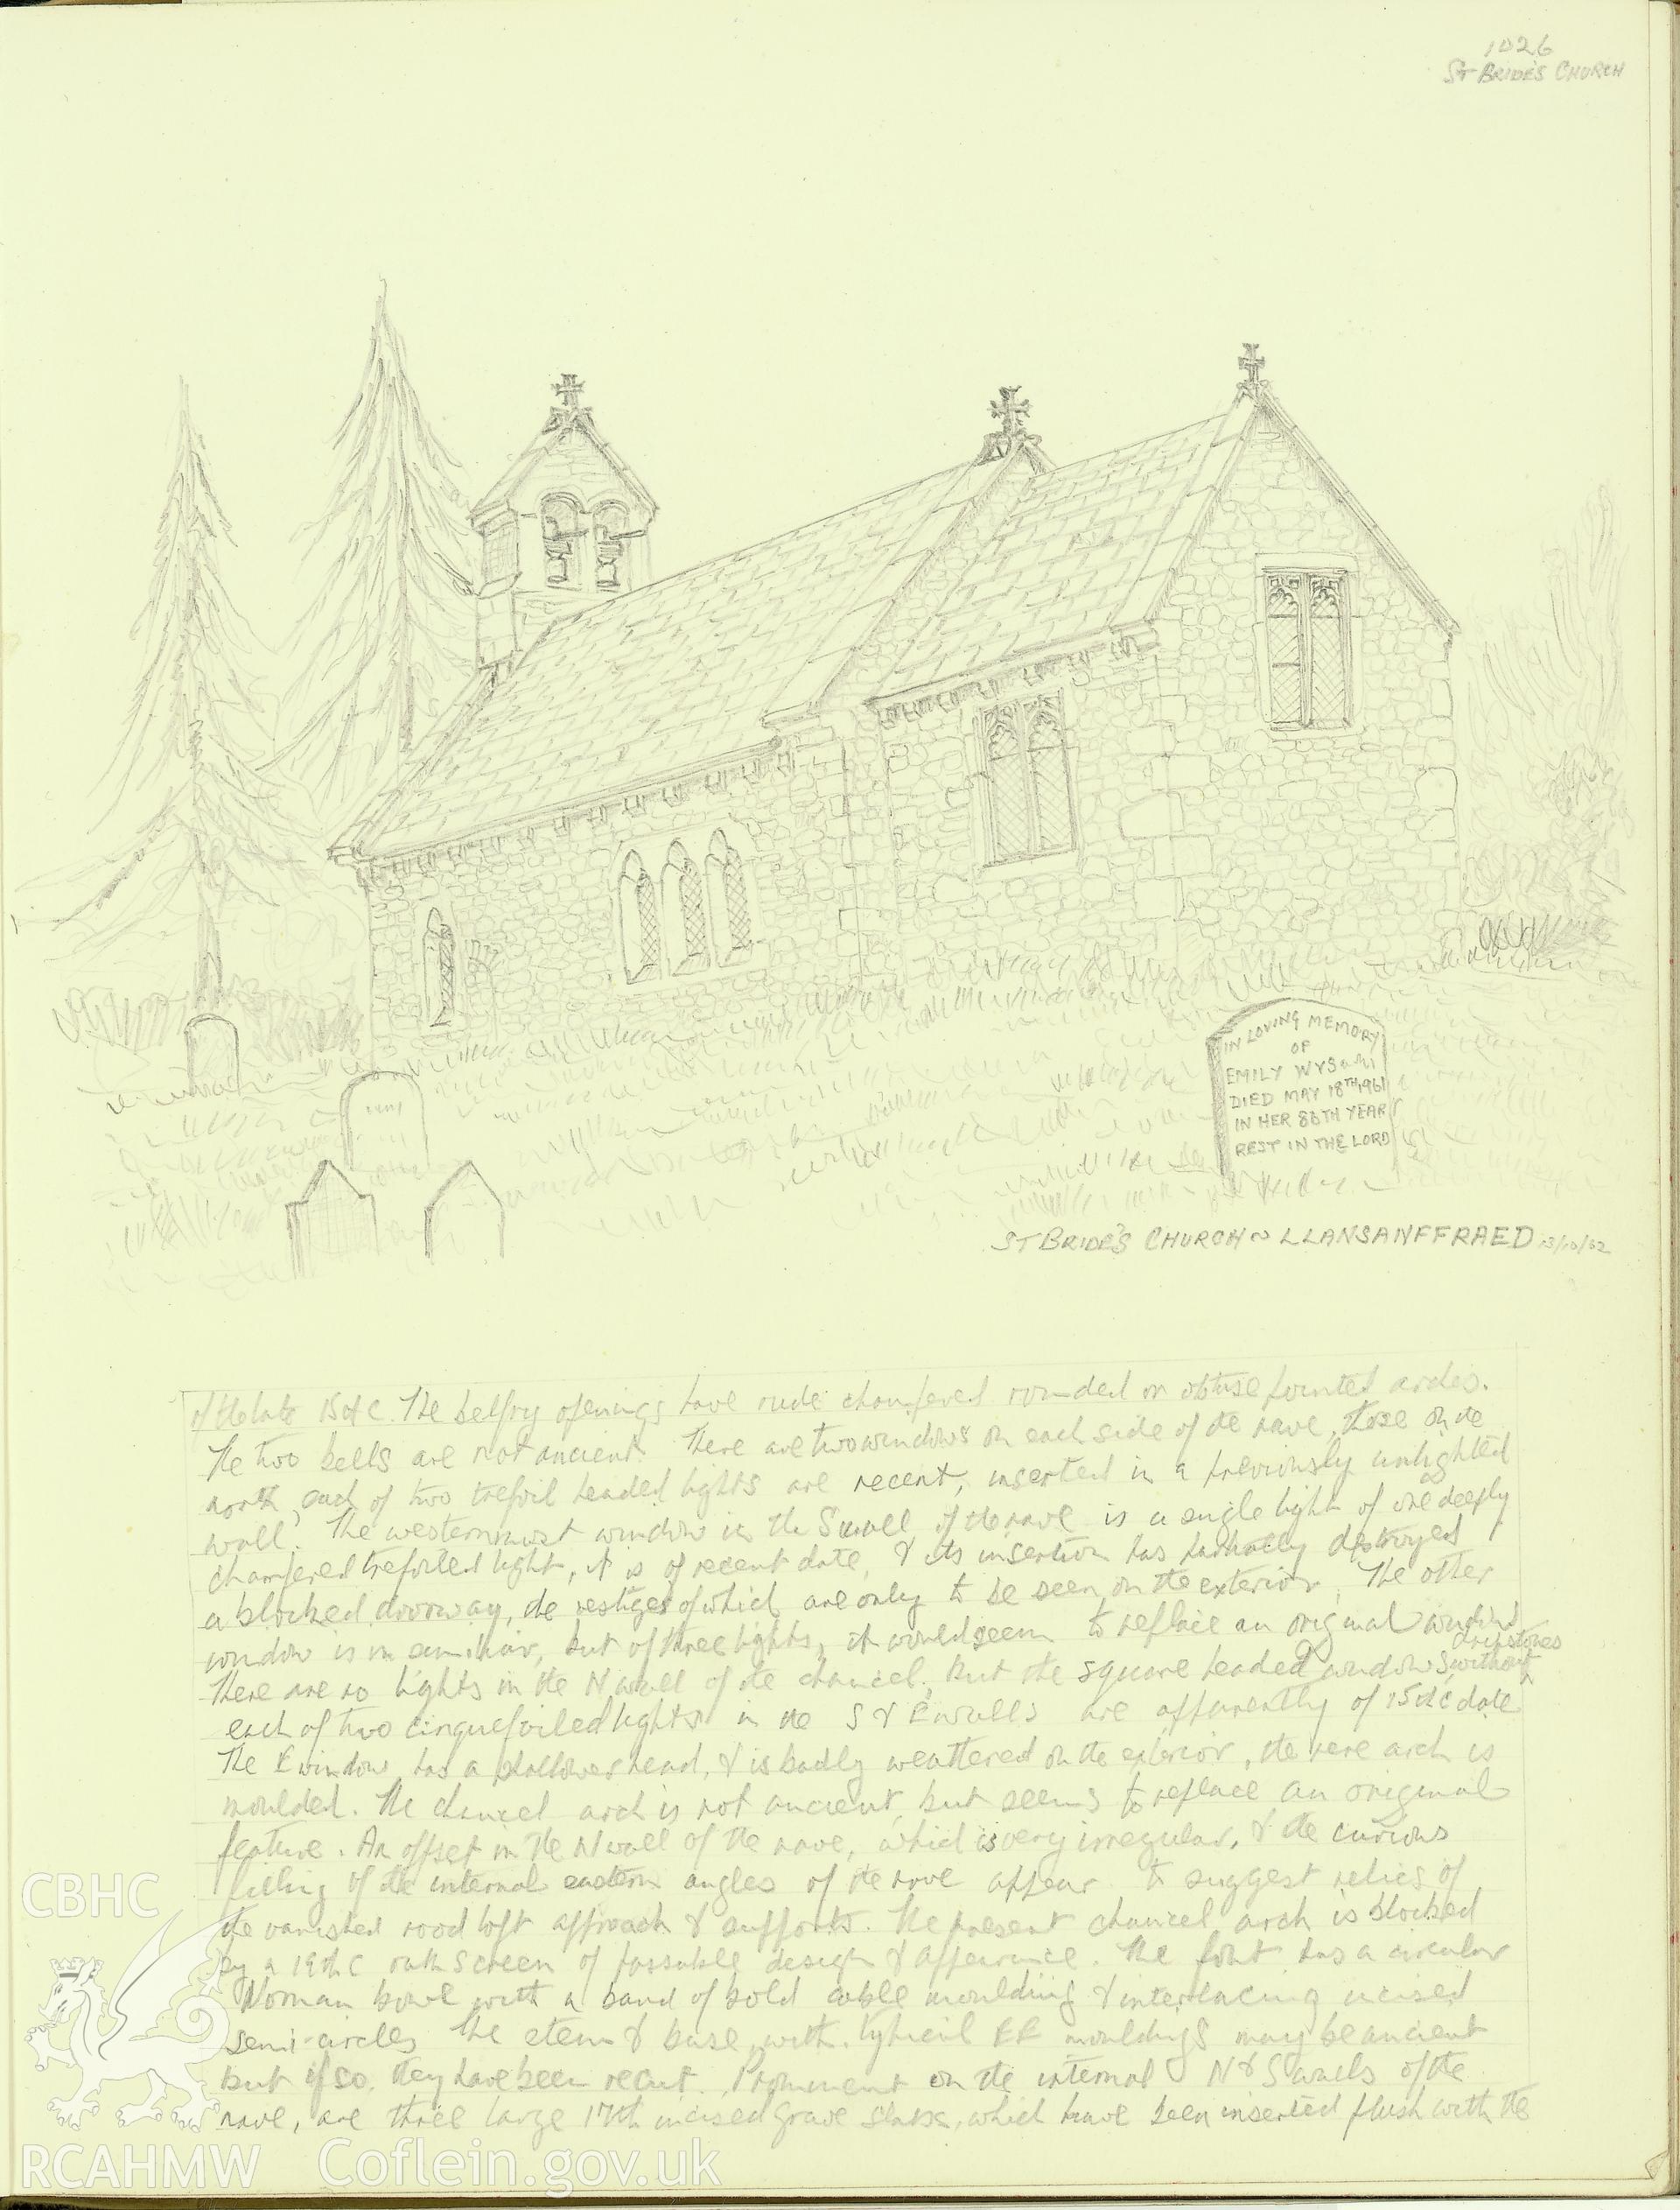 Digitized copy of a pencil sketch  and notes relating to St Bride's Church, Llansantffraed, copied from page 1026 of the notebook collections of R.E. Kay.